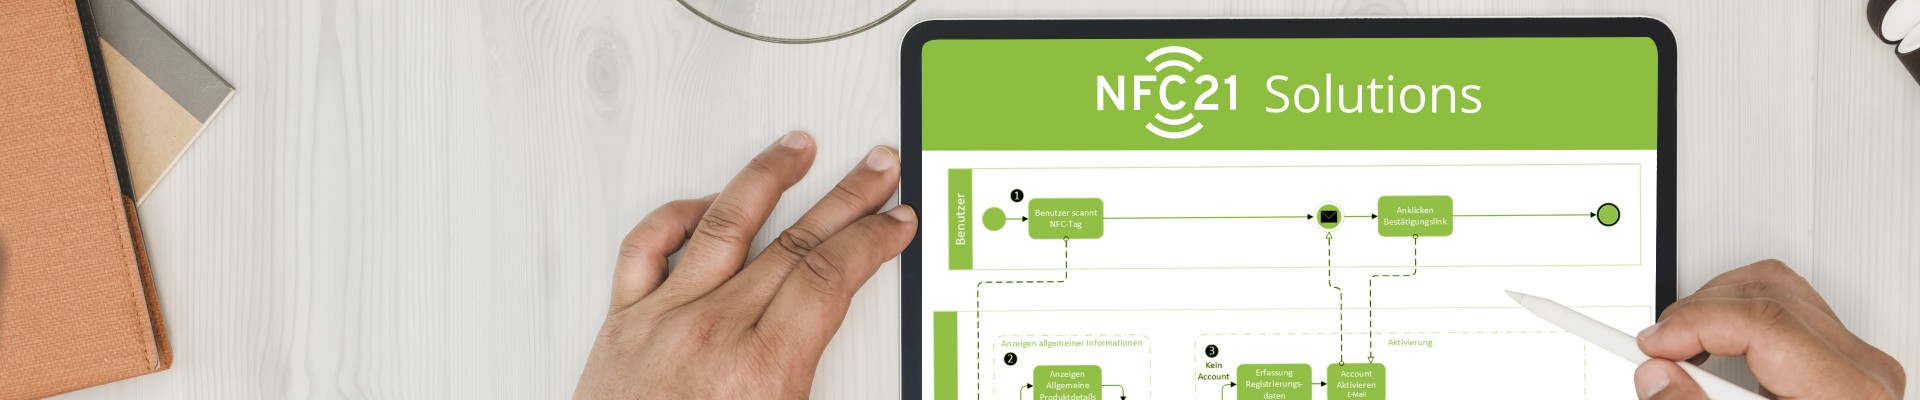 NFC21 – Relaunch unserer Homepage